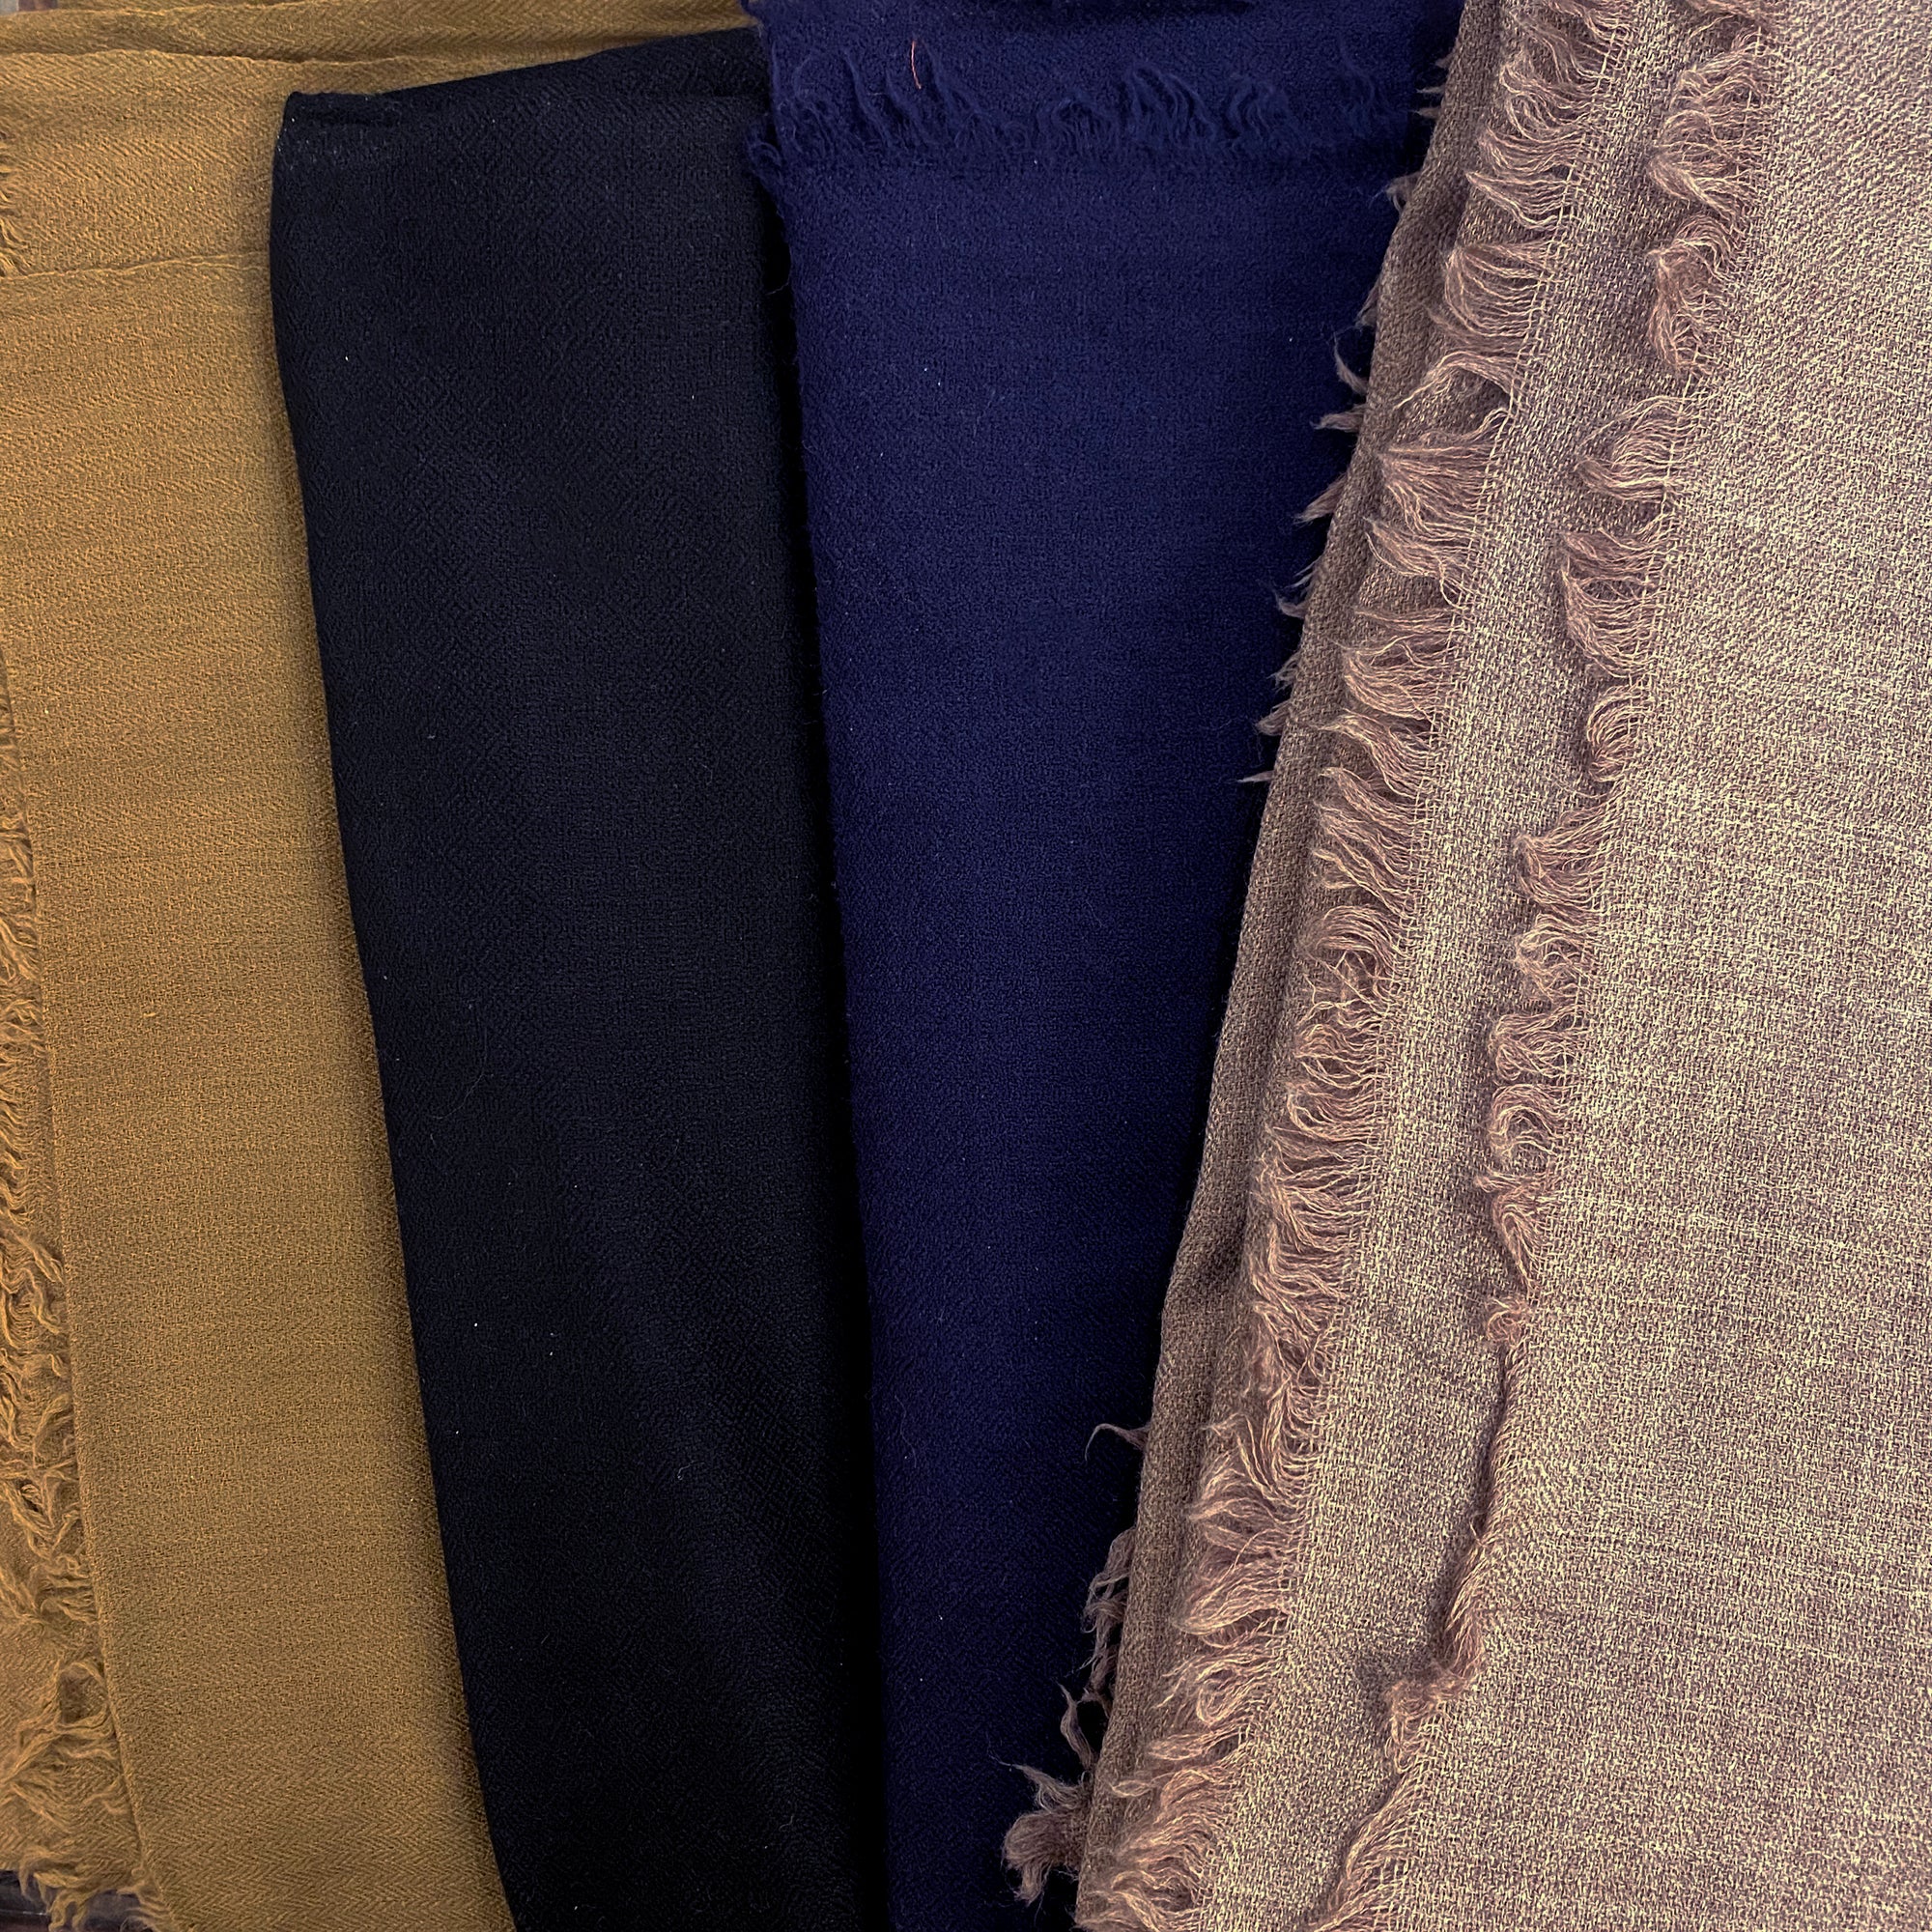 Gents Shawls-4 Colors - Vintage India NYC